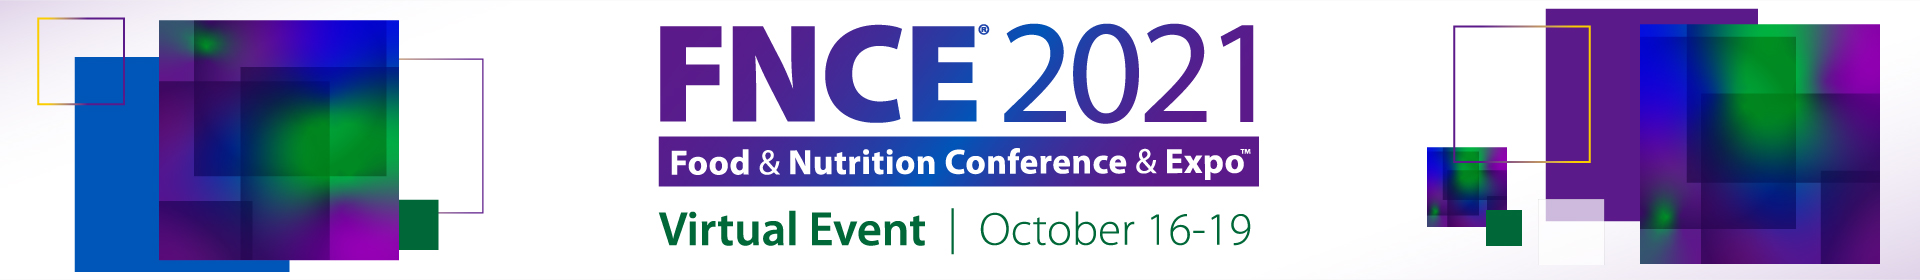 2021 Food & Nutrition Conference & Expo Event Banner